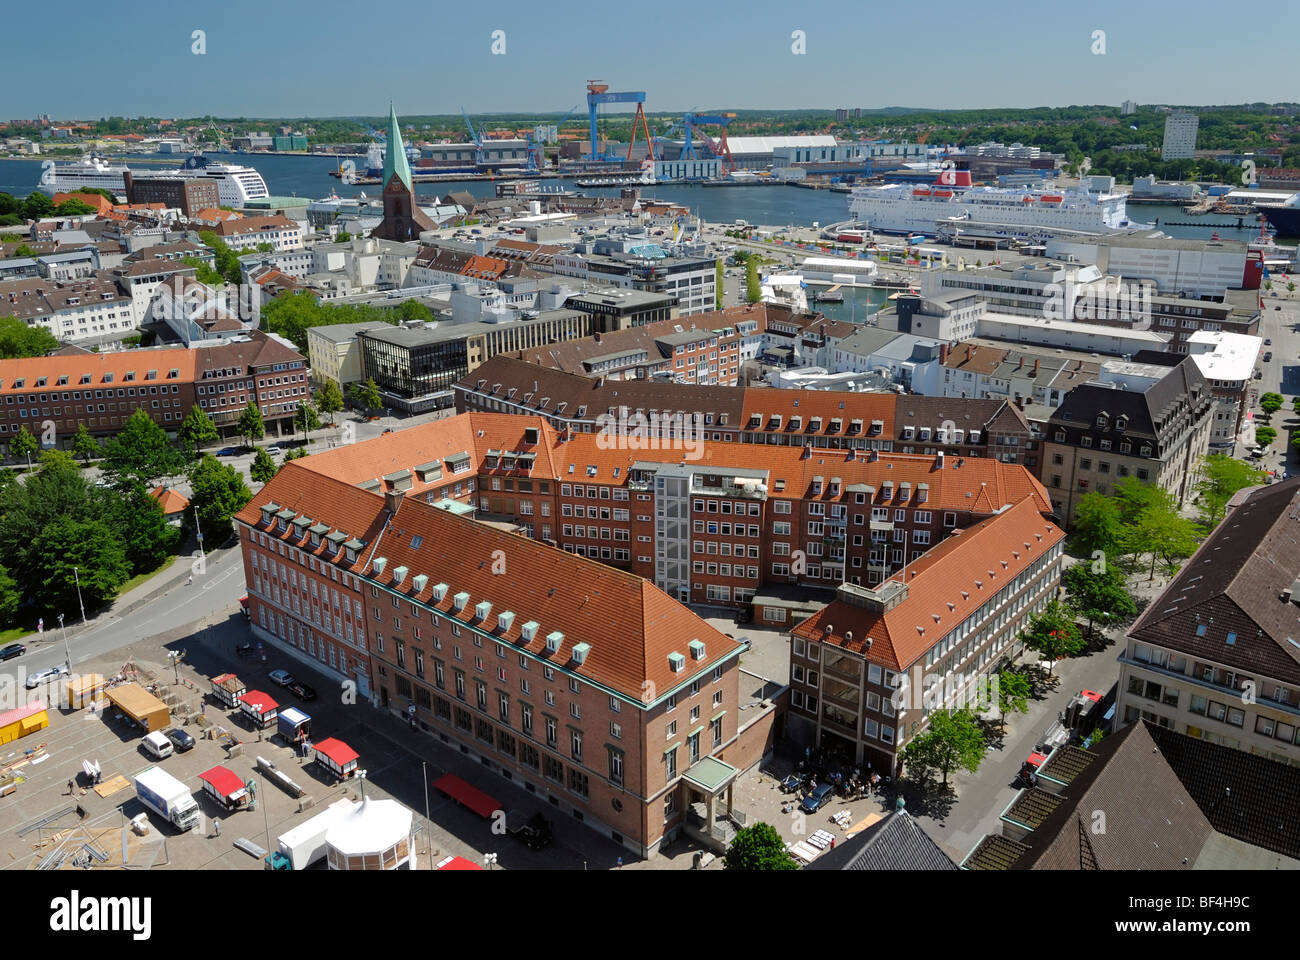 View over the city of Kiel towards the inner fjord with a cruise ship and a Stena Line ferry, Schleswig-Holstein, Germany, Euro Stock Photo